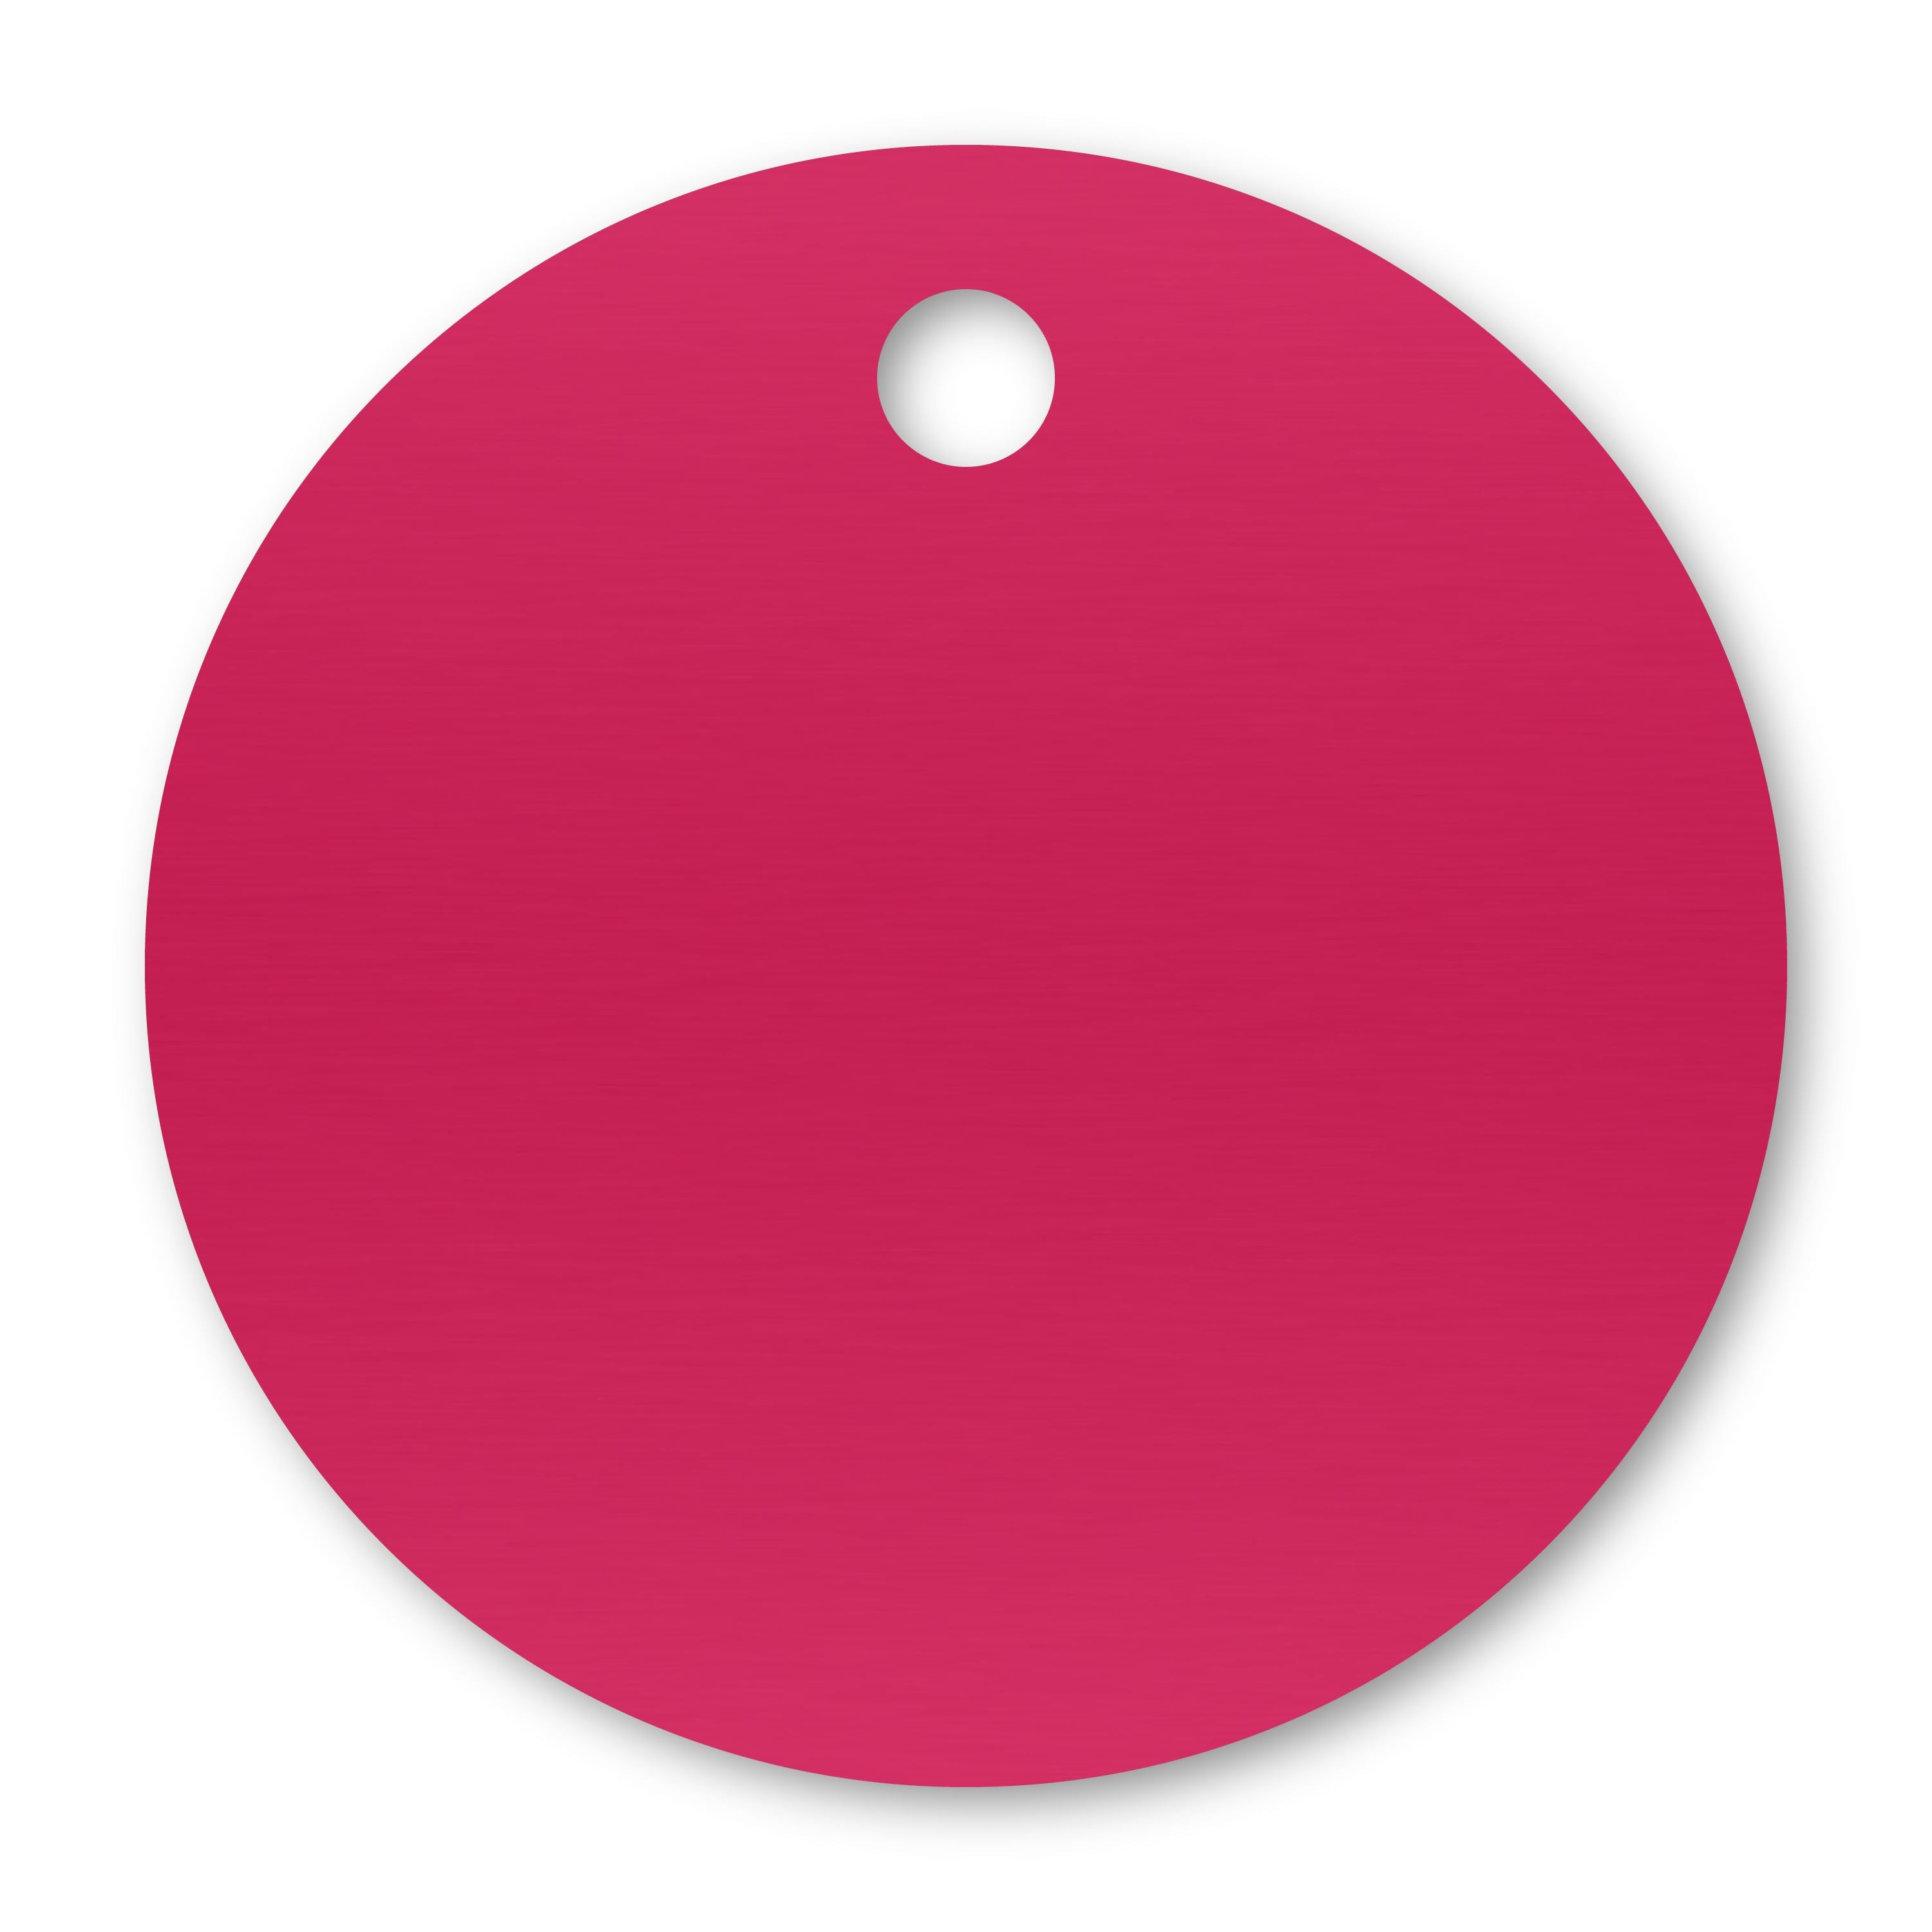 Anodized Aluminum Round Tags, 2" with 3/16" Hole, Laser Engraved Metal Tags Craftworks NW Pink 